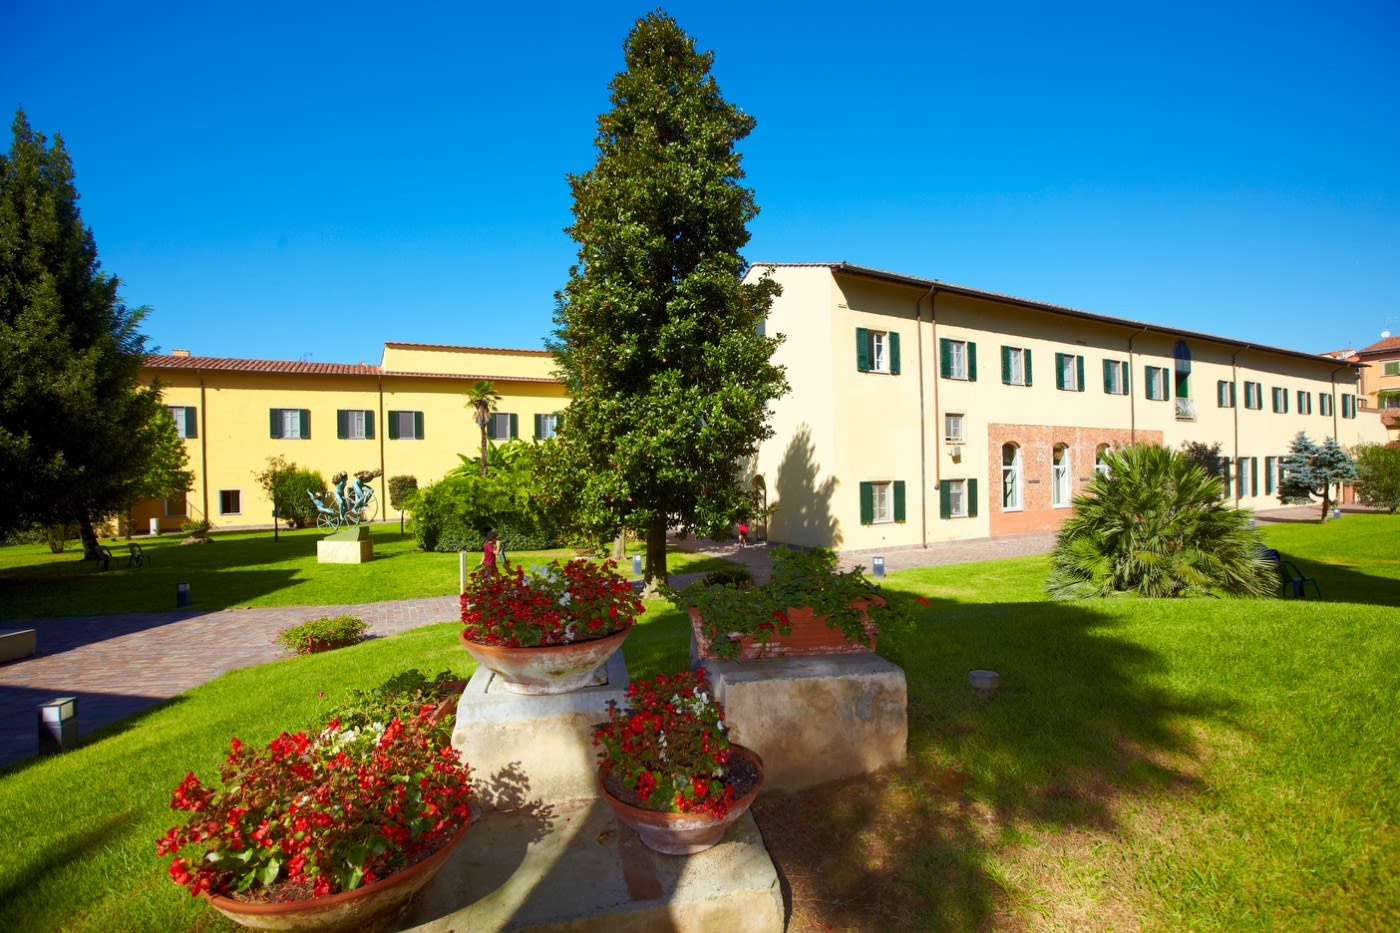 Cheapest Universities in Italy